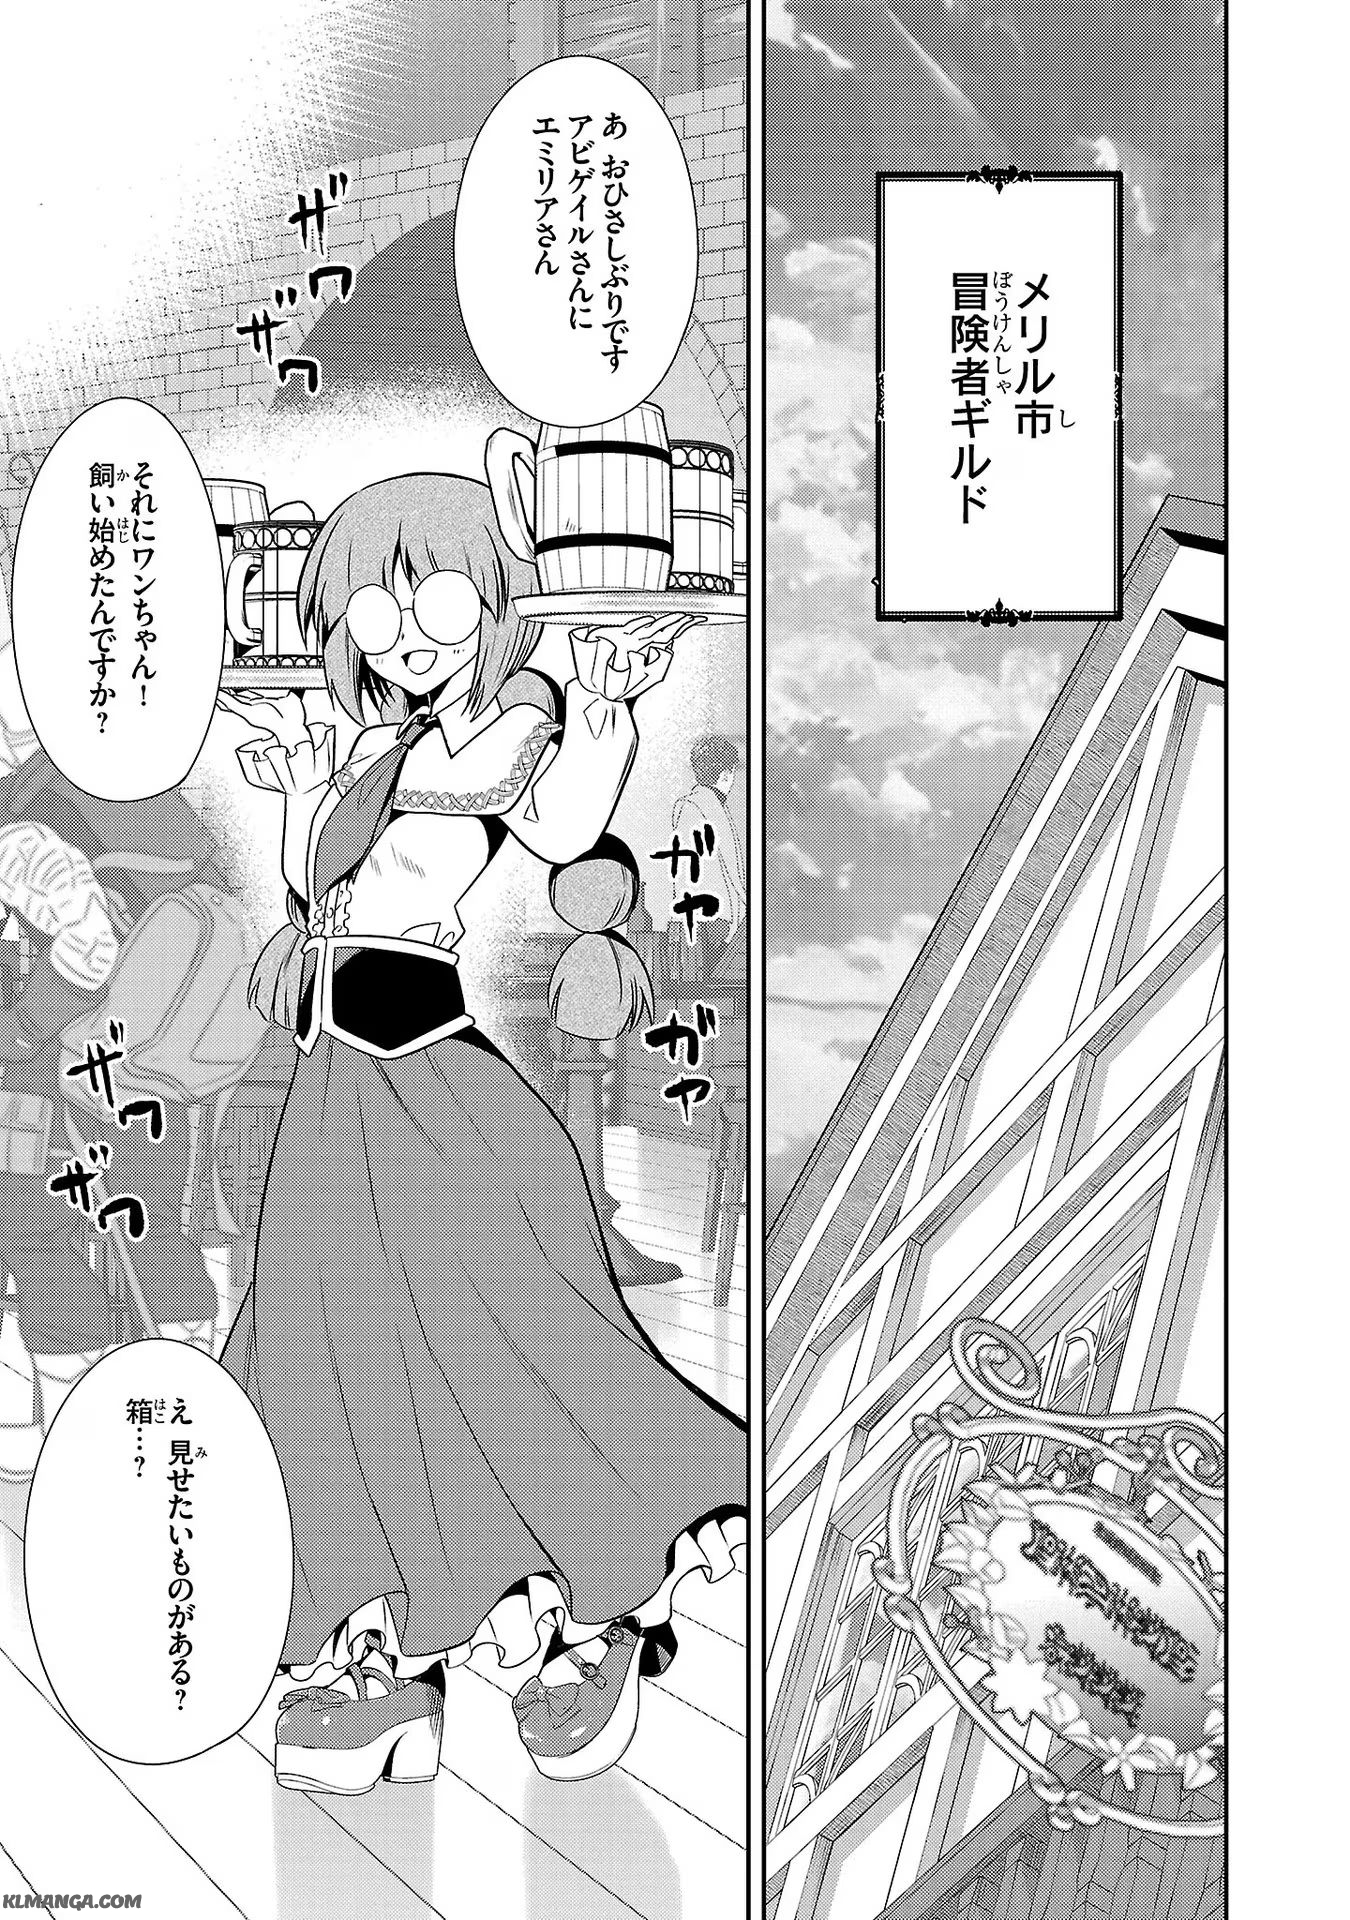 Hungry Saint and Full-Stomach Witch’s Slow Life in Another World! 腹ペコ聖女とまんぷく魔女の異世界スローライフ! 第13話 - Page 13